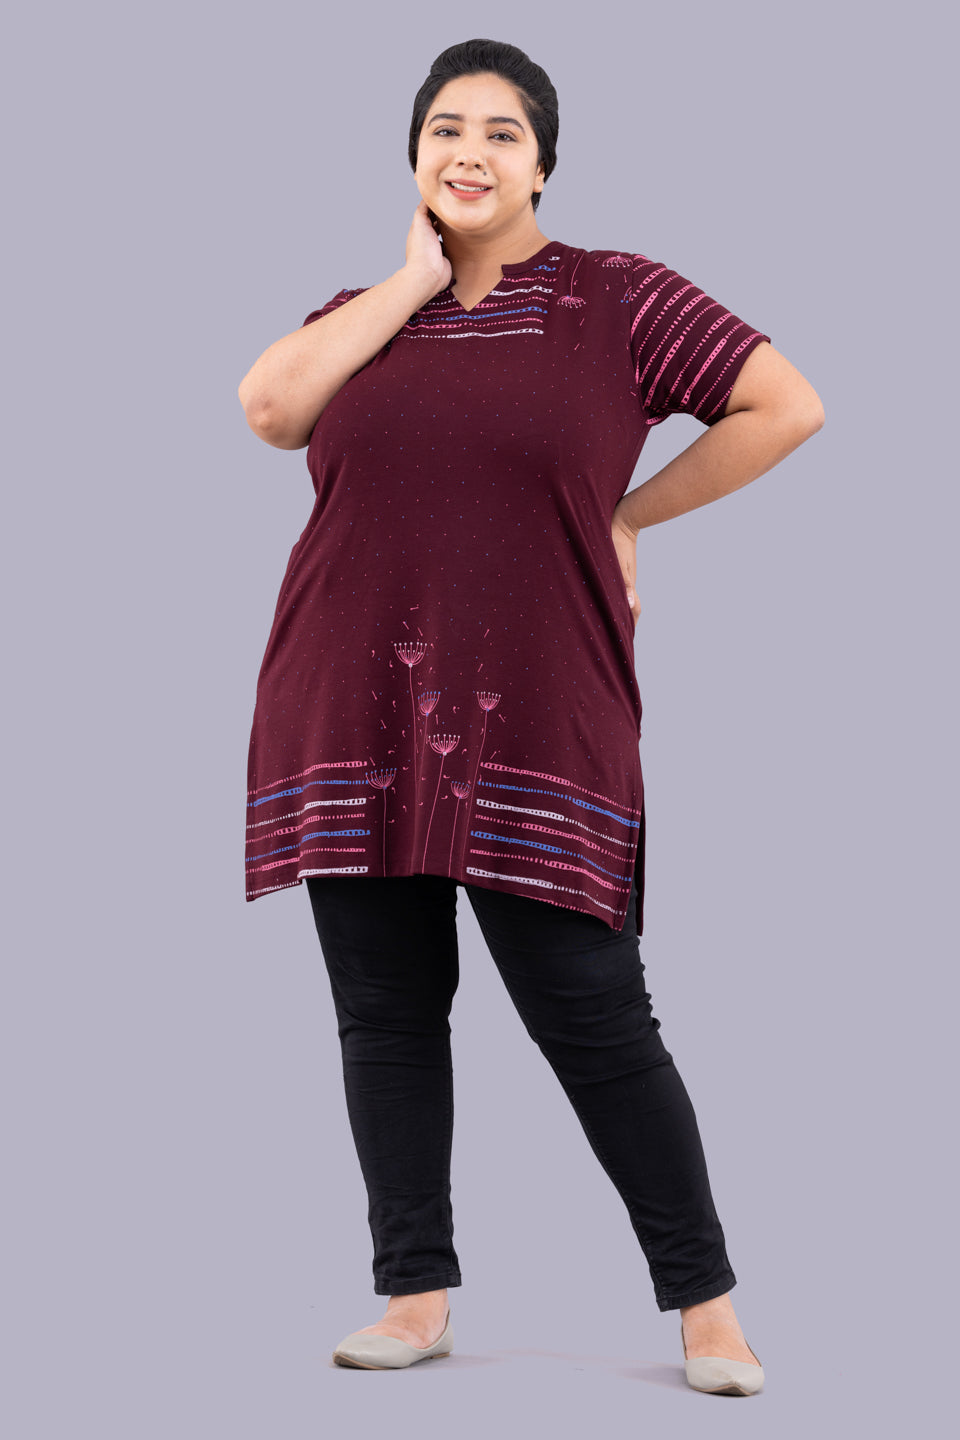 Plus Size Printed Long Tops for Women Full Sleeves - Wine At Best Prices